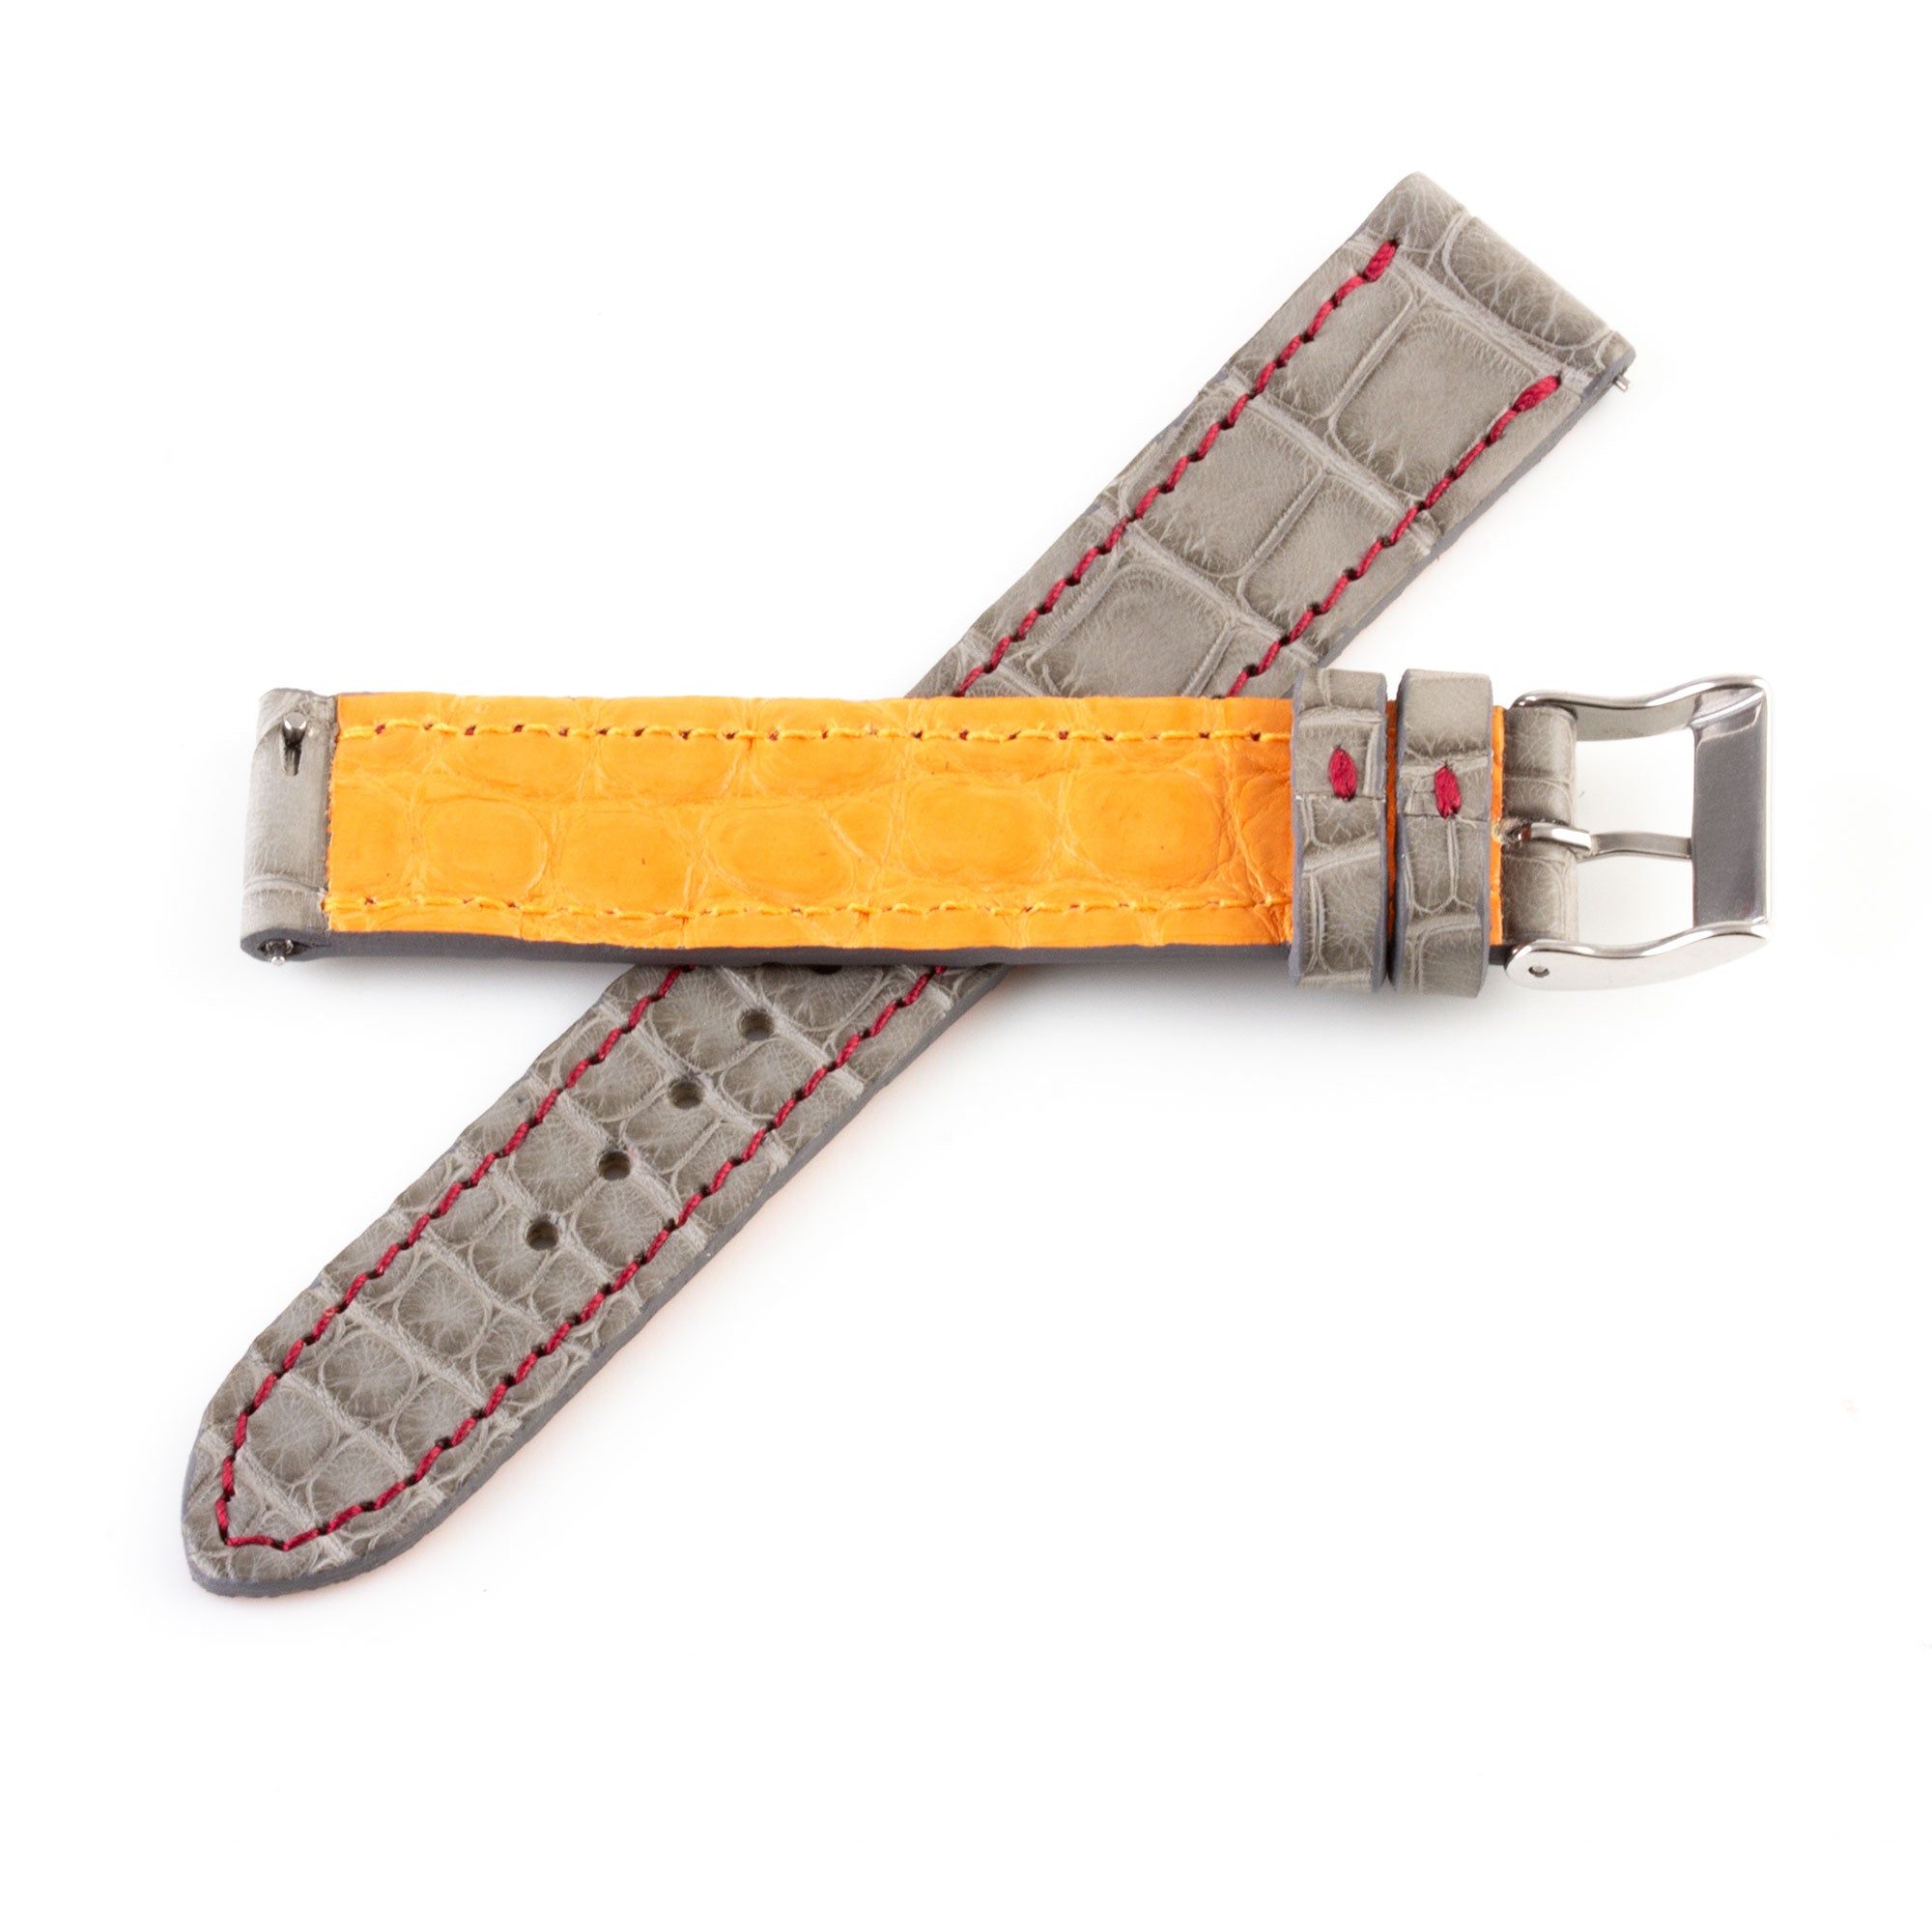 Alligator "Solo" leather watch band - 17mm width (0.67 inches) / Size M (n° 10)